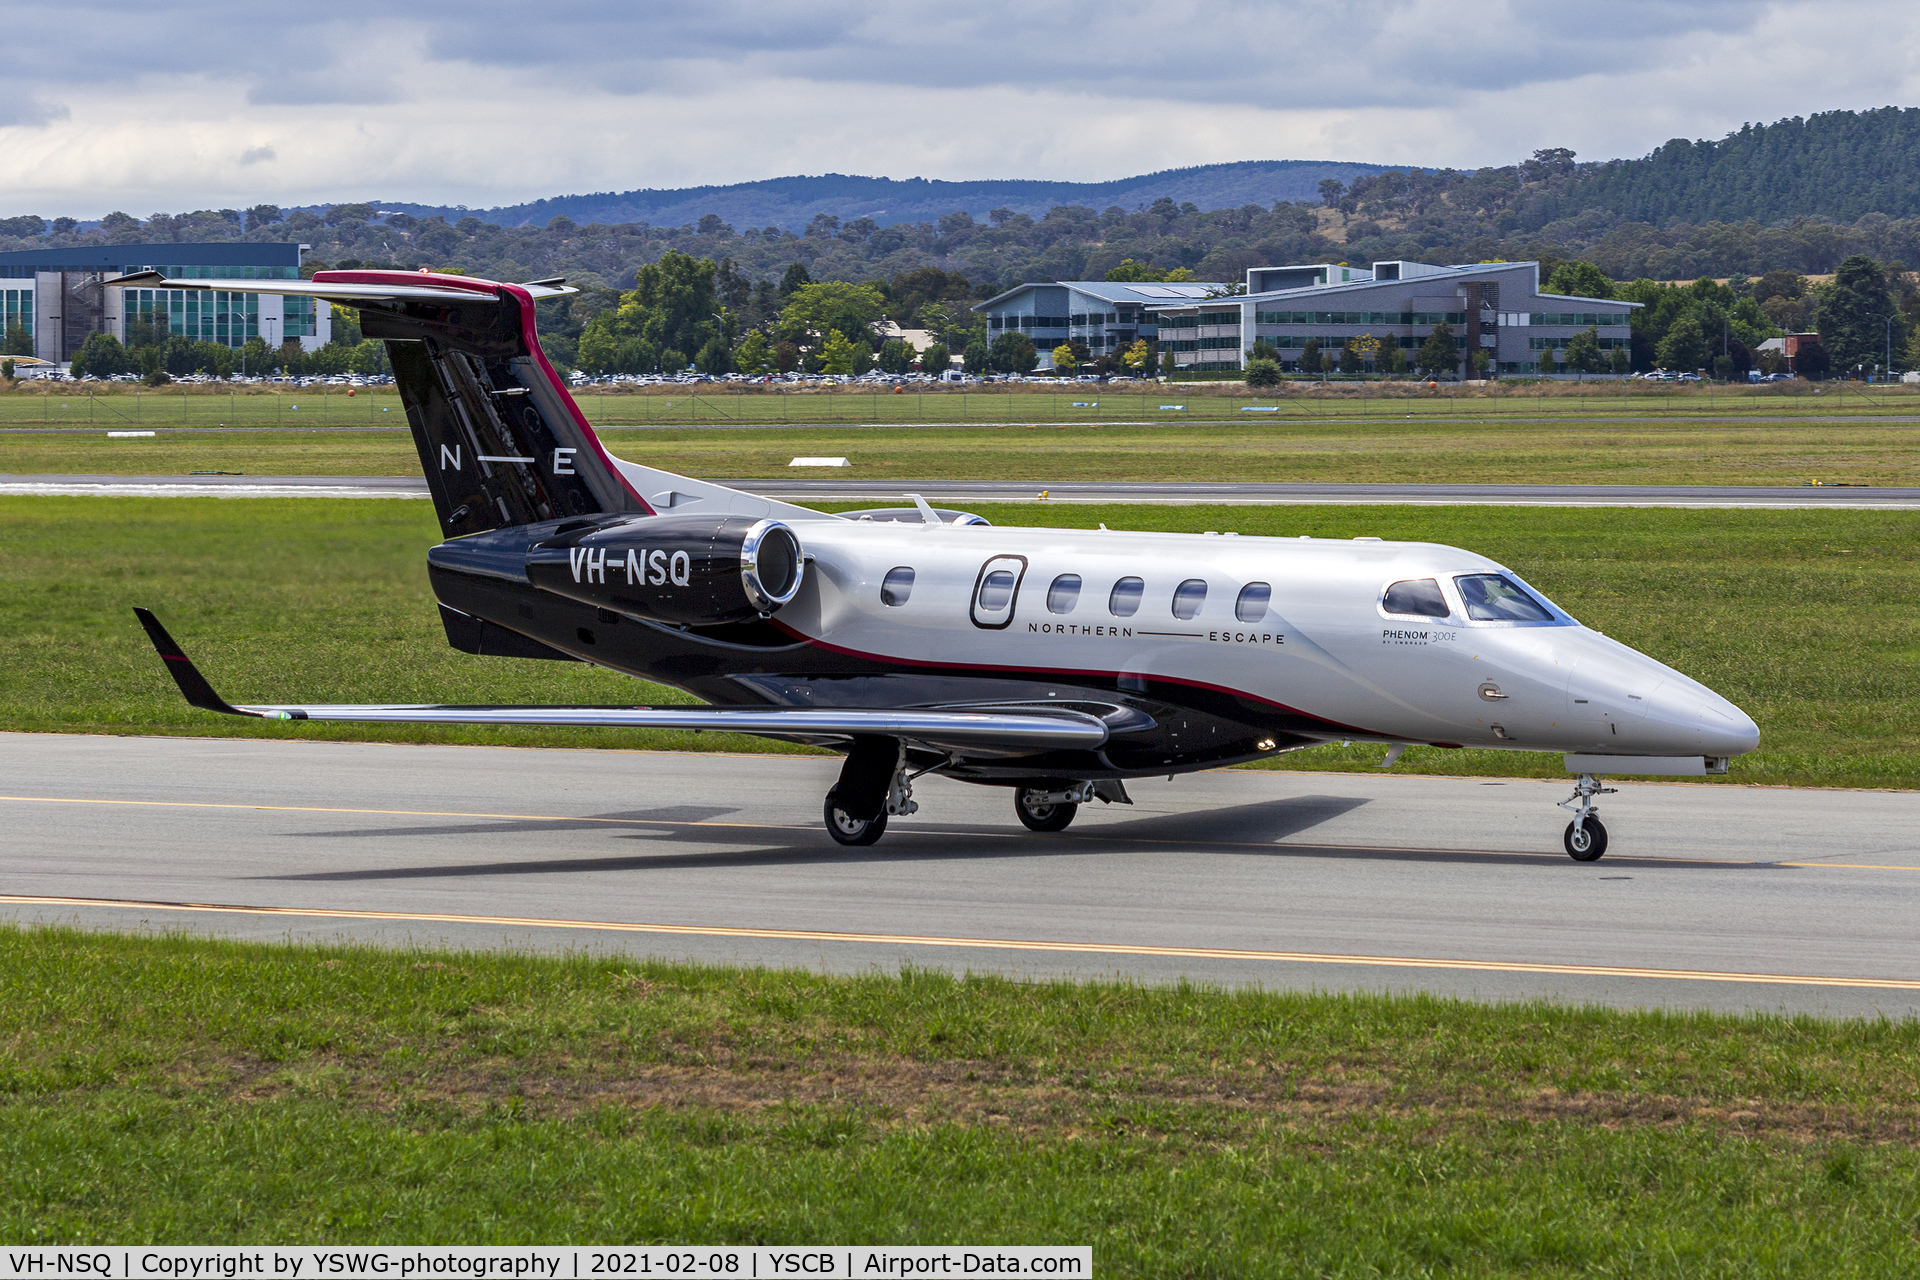 VH-NSQ, 2018 Embraer EMB-505 Phenom 300 C/N 50500453, Northern Escape (VH-NSQ) Embraer Phenom 300E taxiing at Canberra Airport.